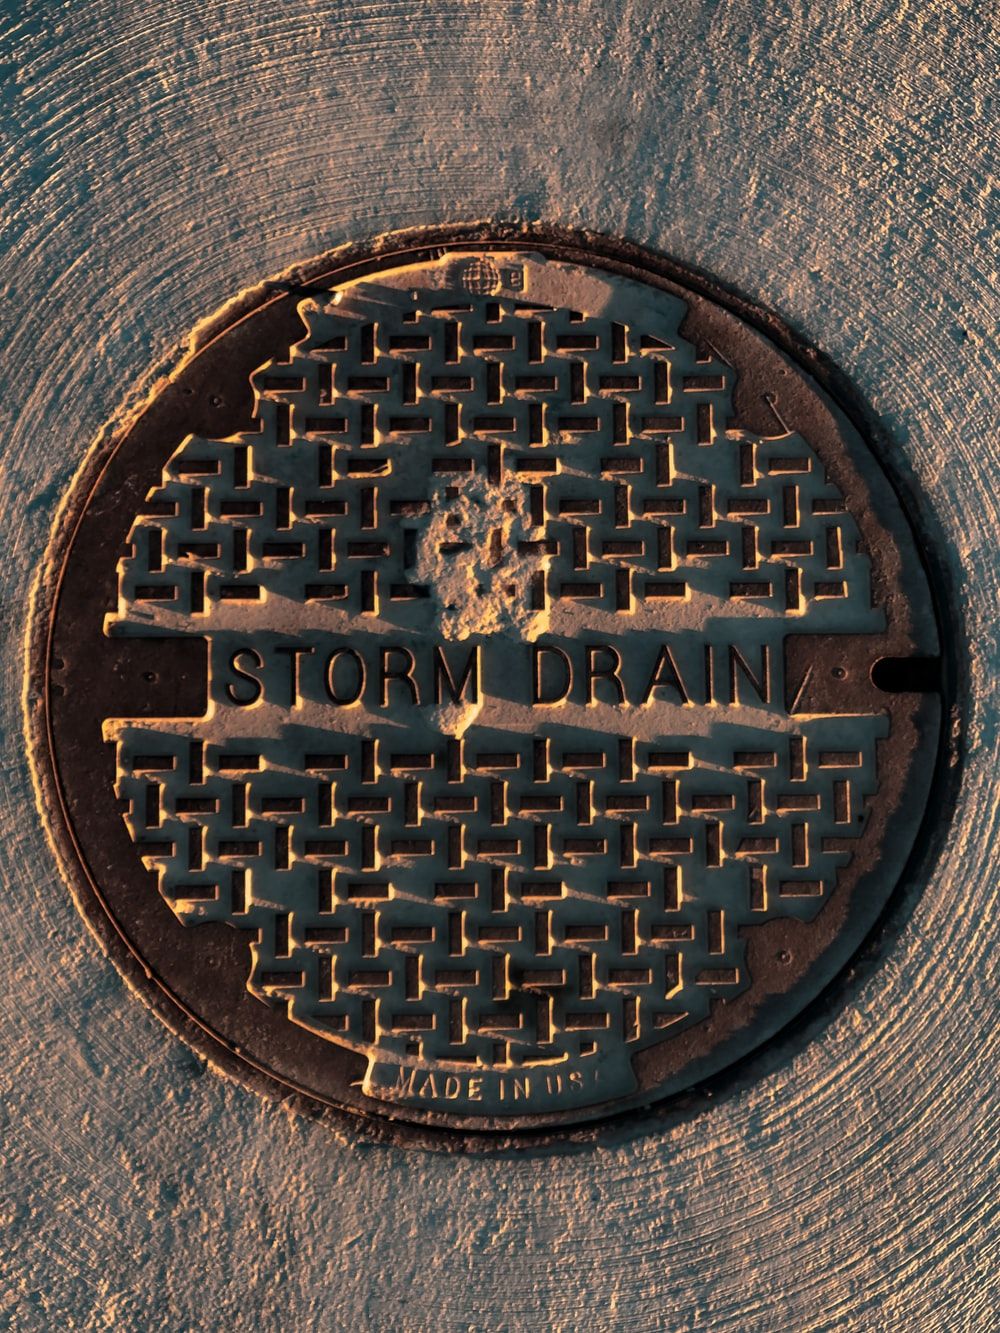 Sewer Picture. Download Free Image .com